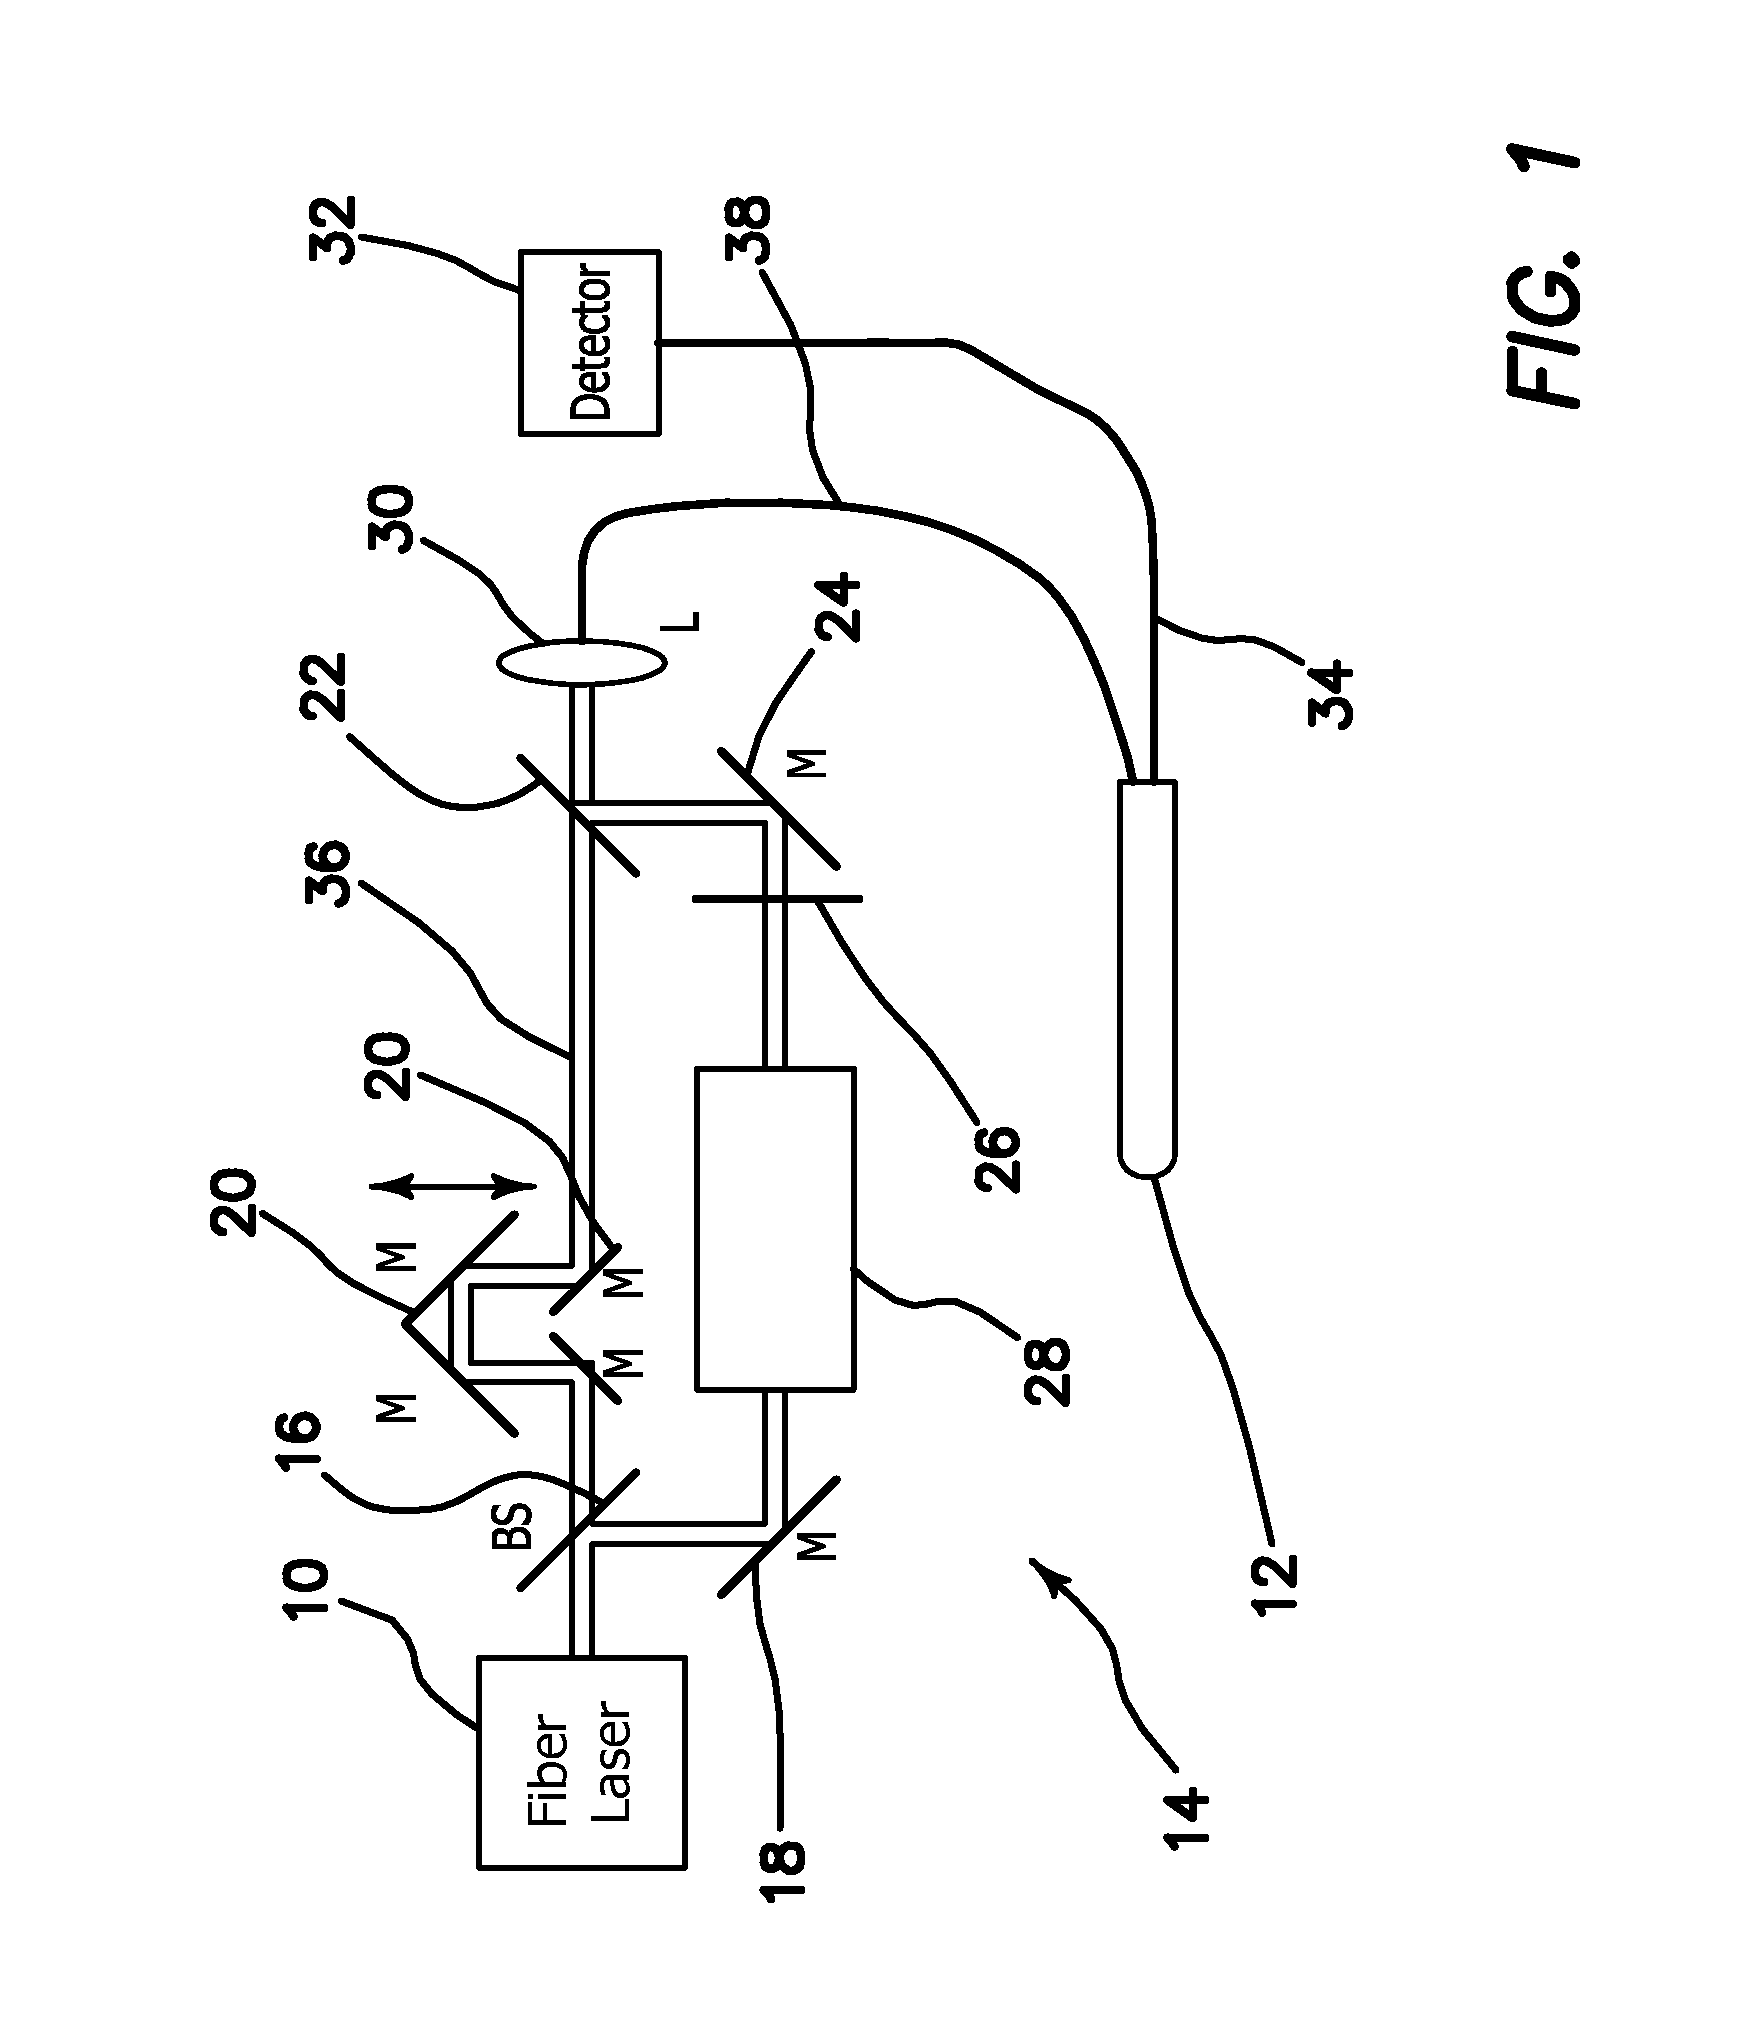 System and Method for Efficient Coherence Anti-Stokes Raman Scattering Endoscopic and Intravascular Imaging and Multimodal Imaging